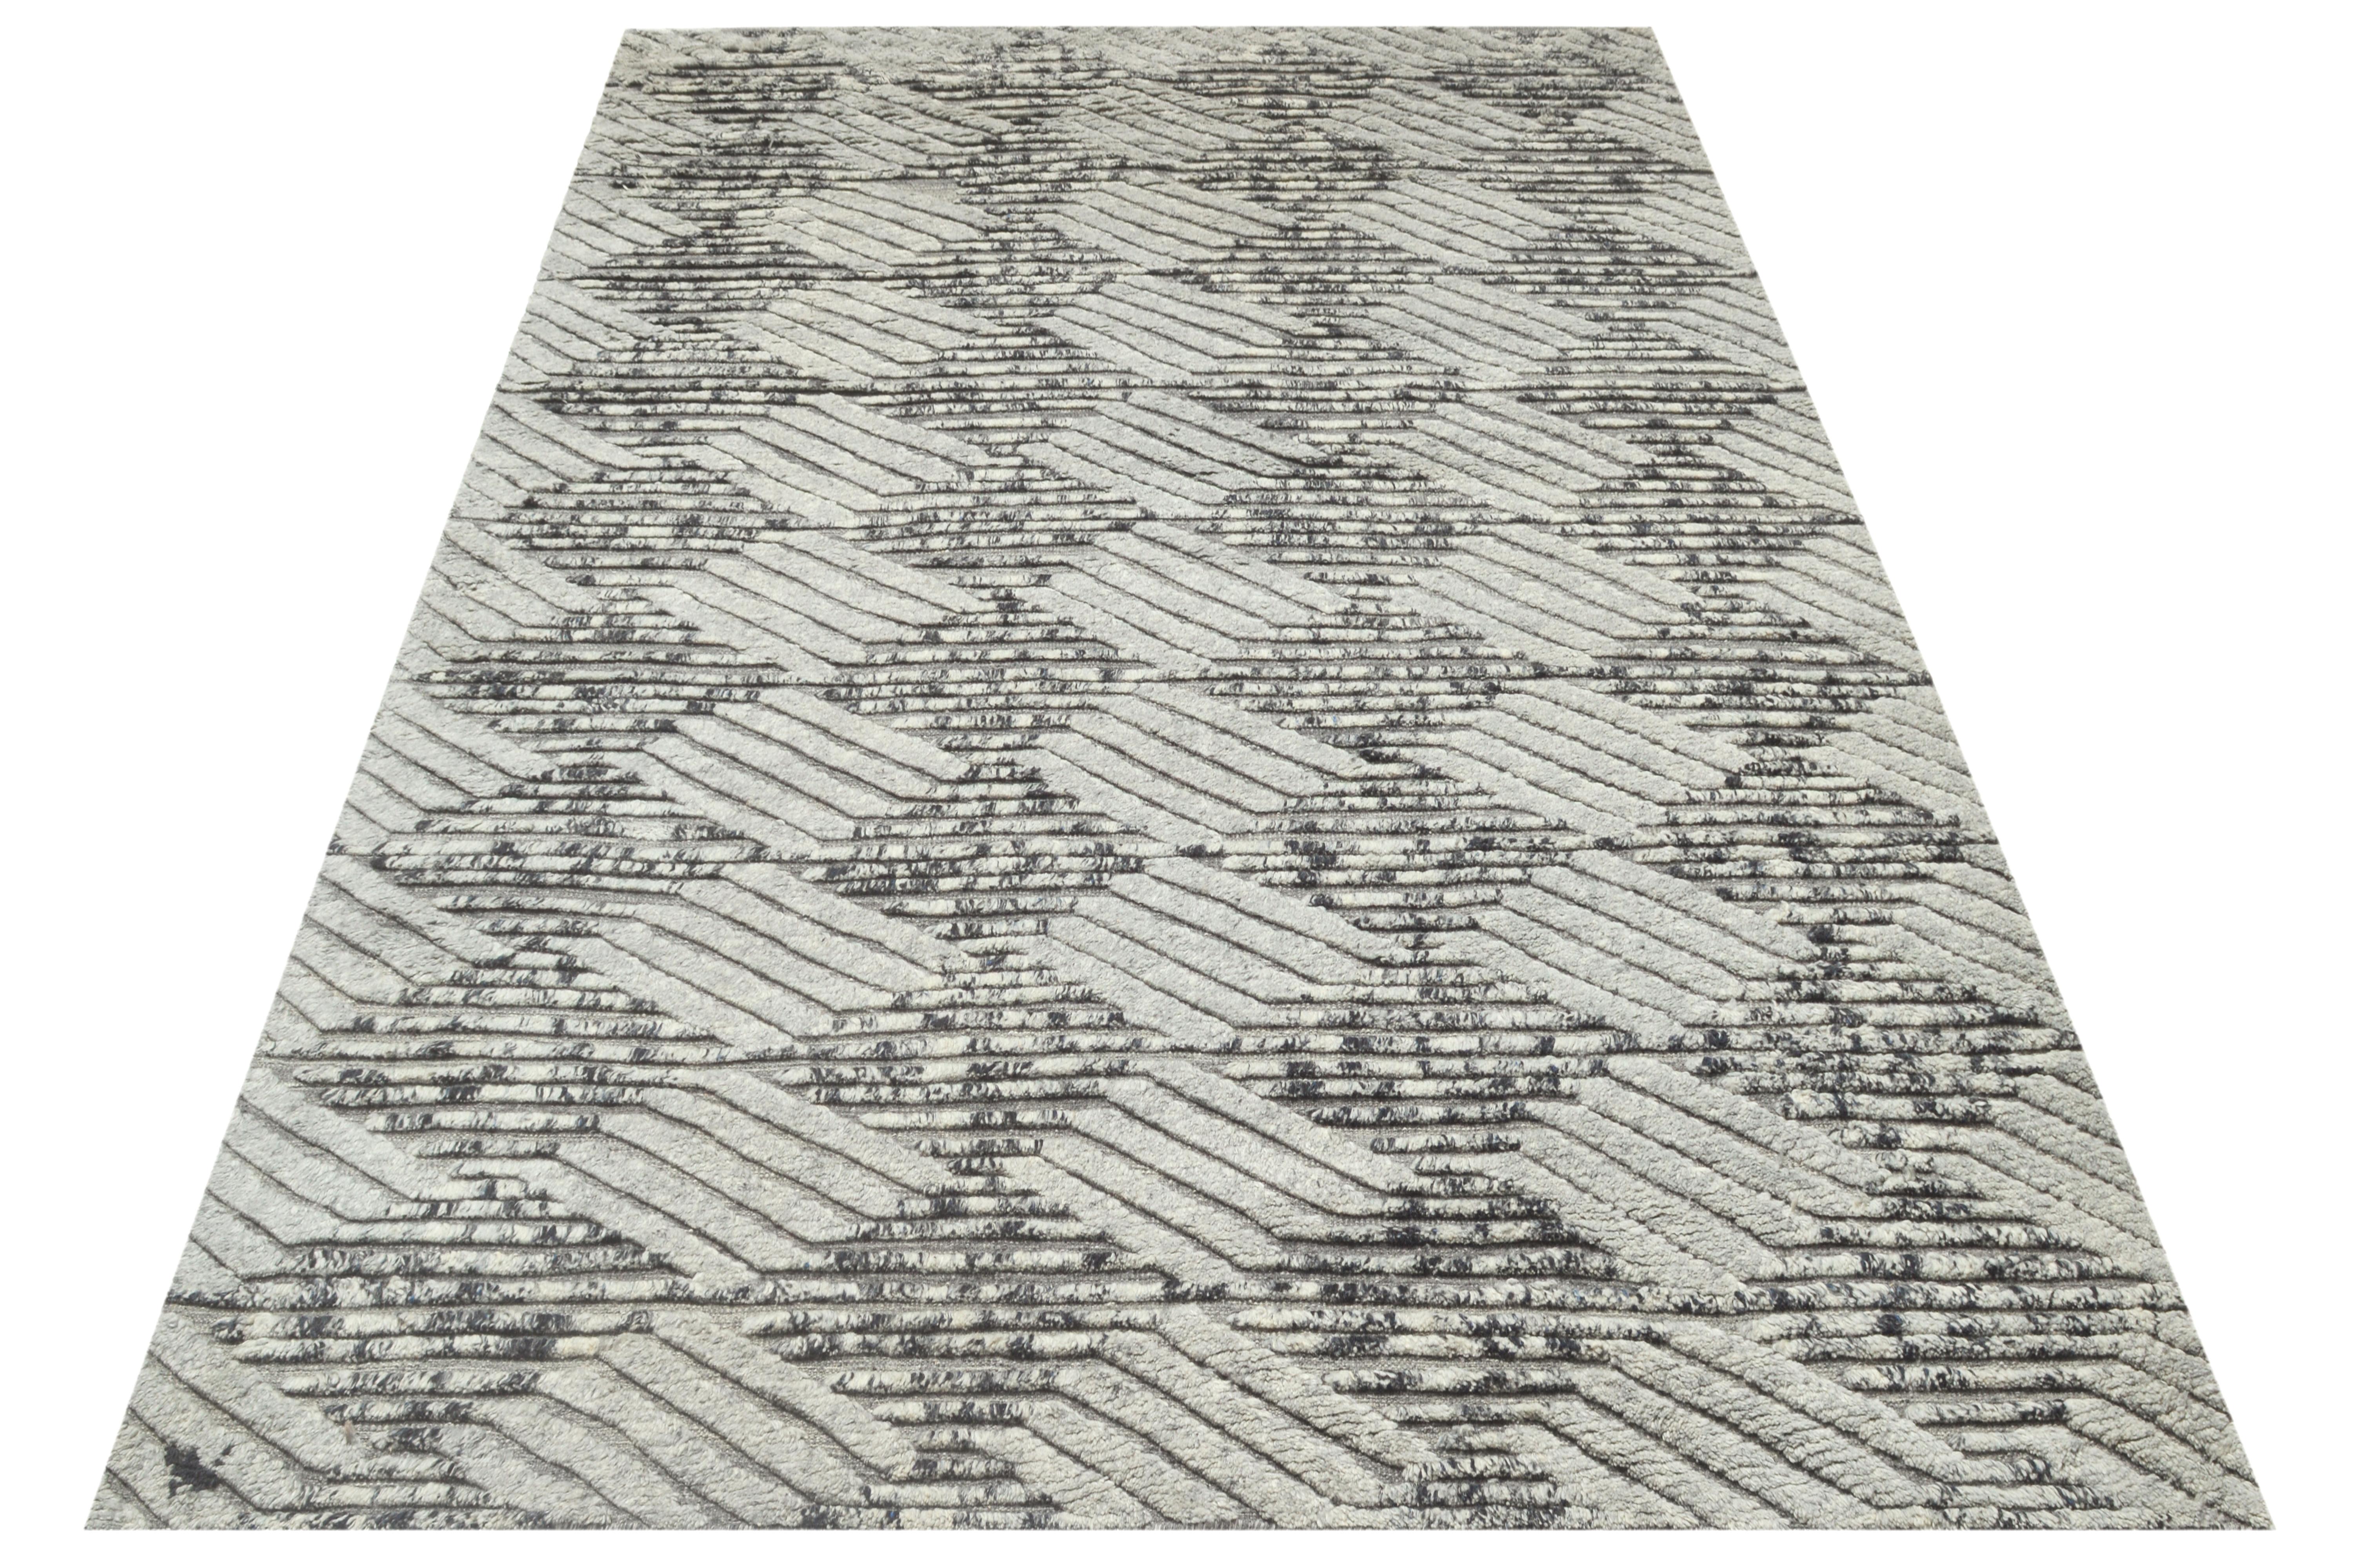 Hand-knotted wool pile on a cotton foundation.

Approximate Dimensions: 10' x 14'

Origin: India

Field Color: Silver

Accent Color: Gray, Charcoal.